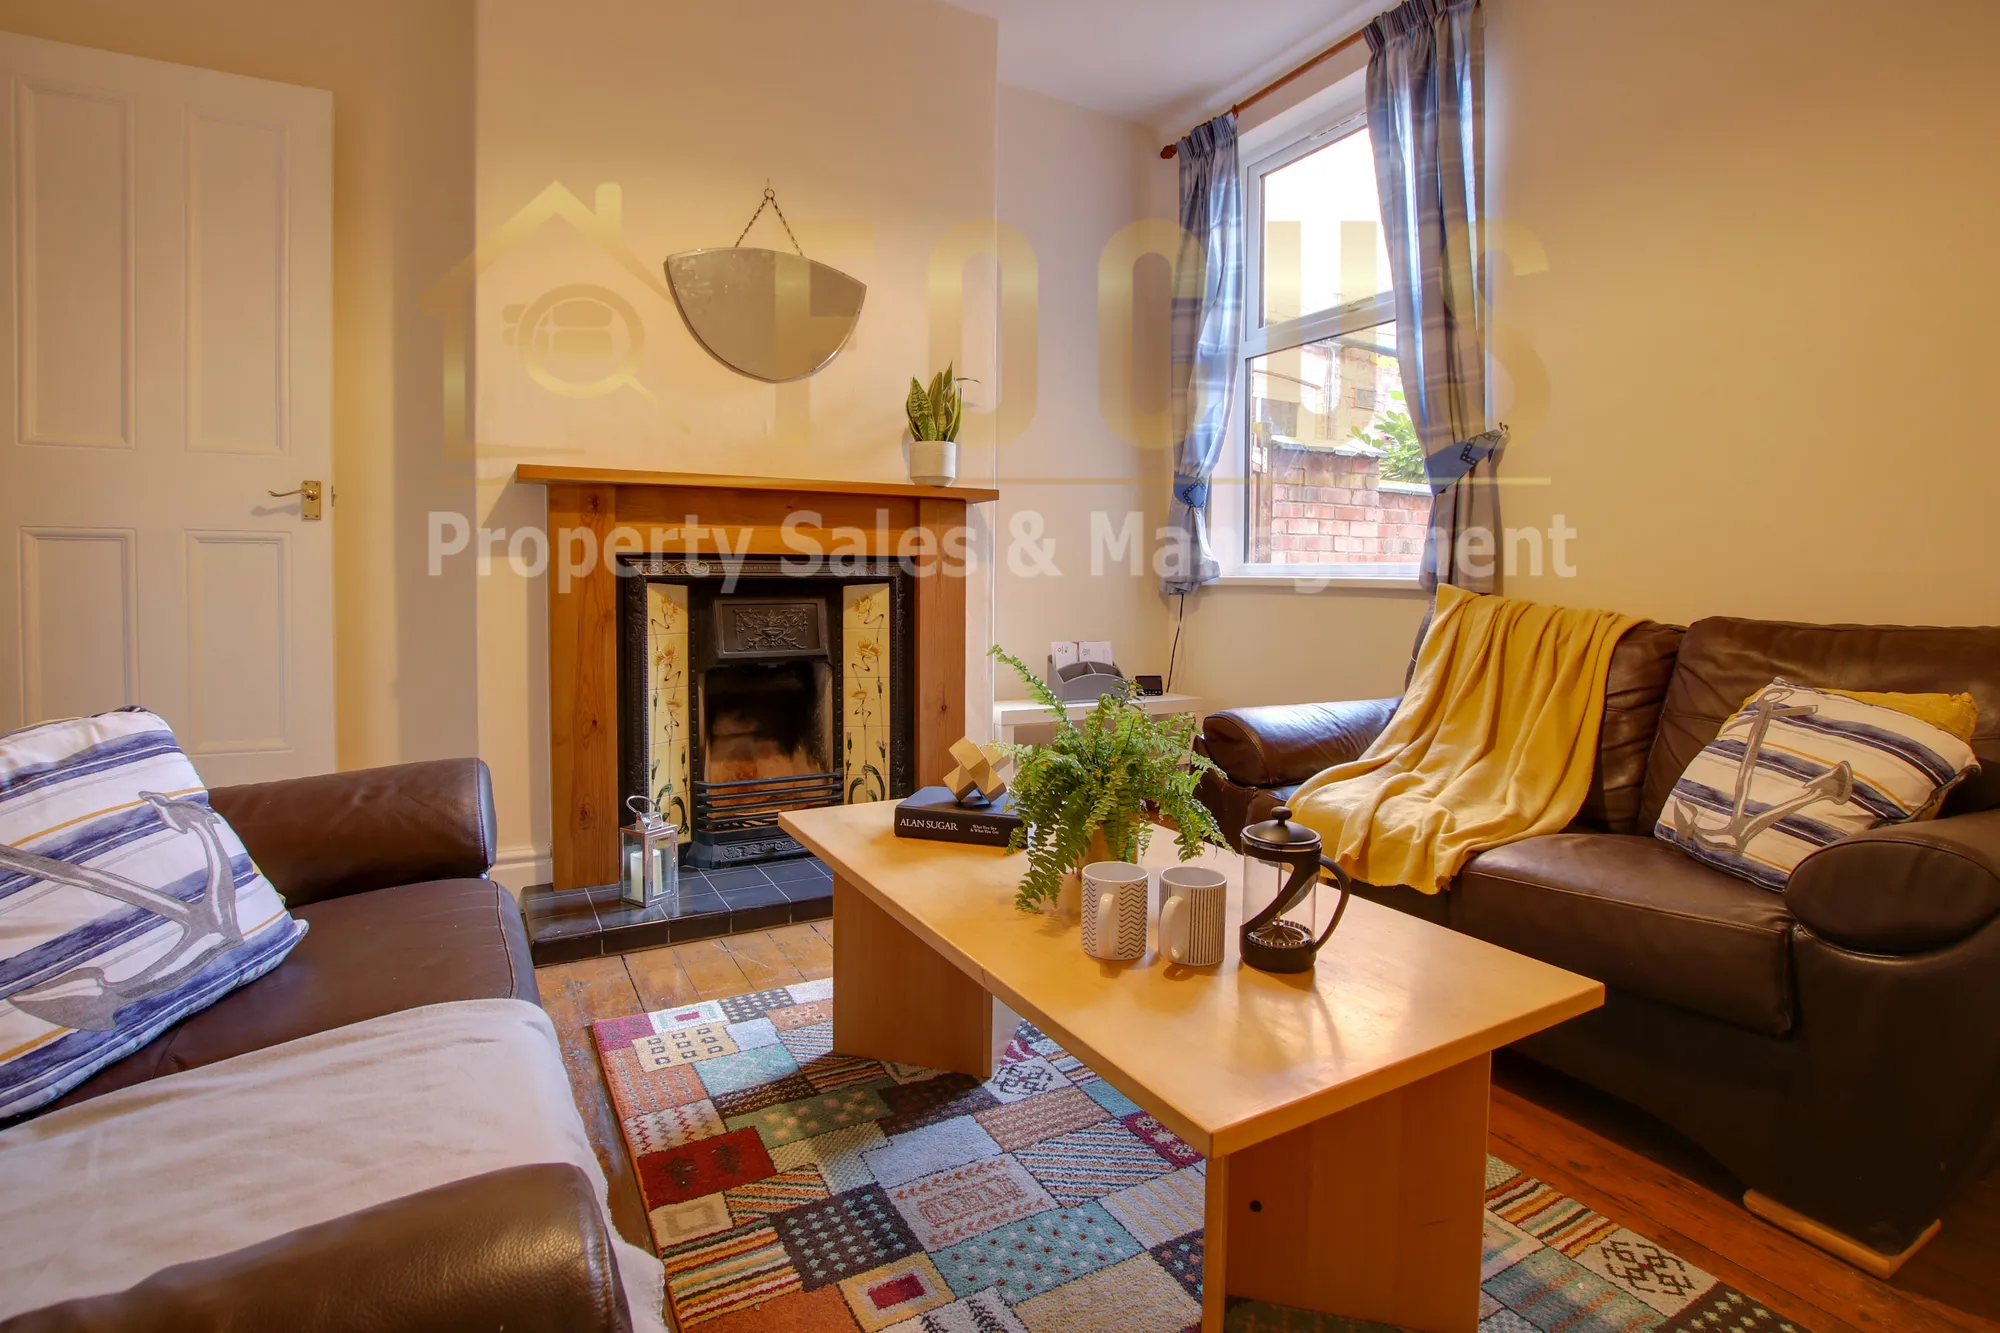 4 bed mid-terraced house to rent in Thurlow Road, Leicester - Property Image 1